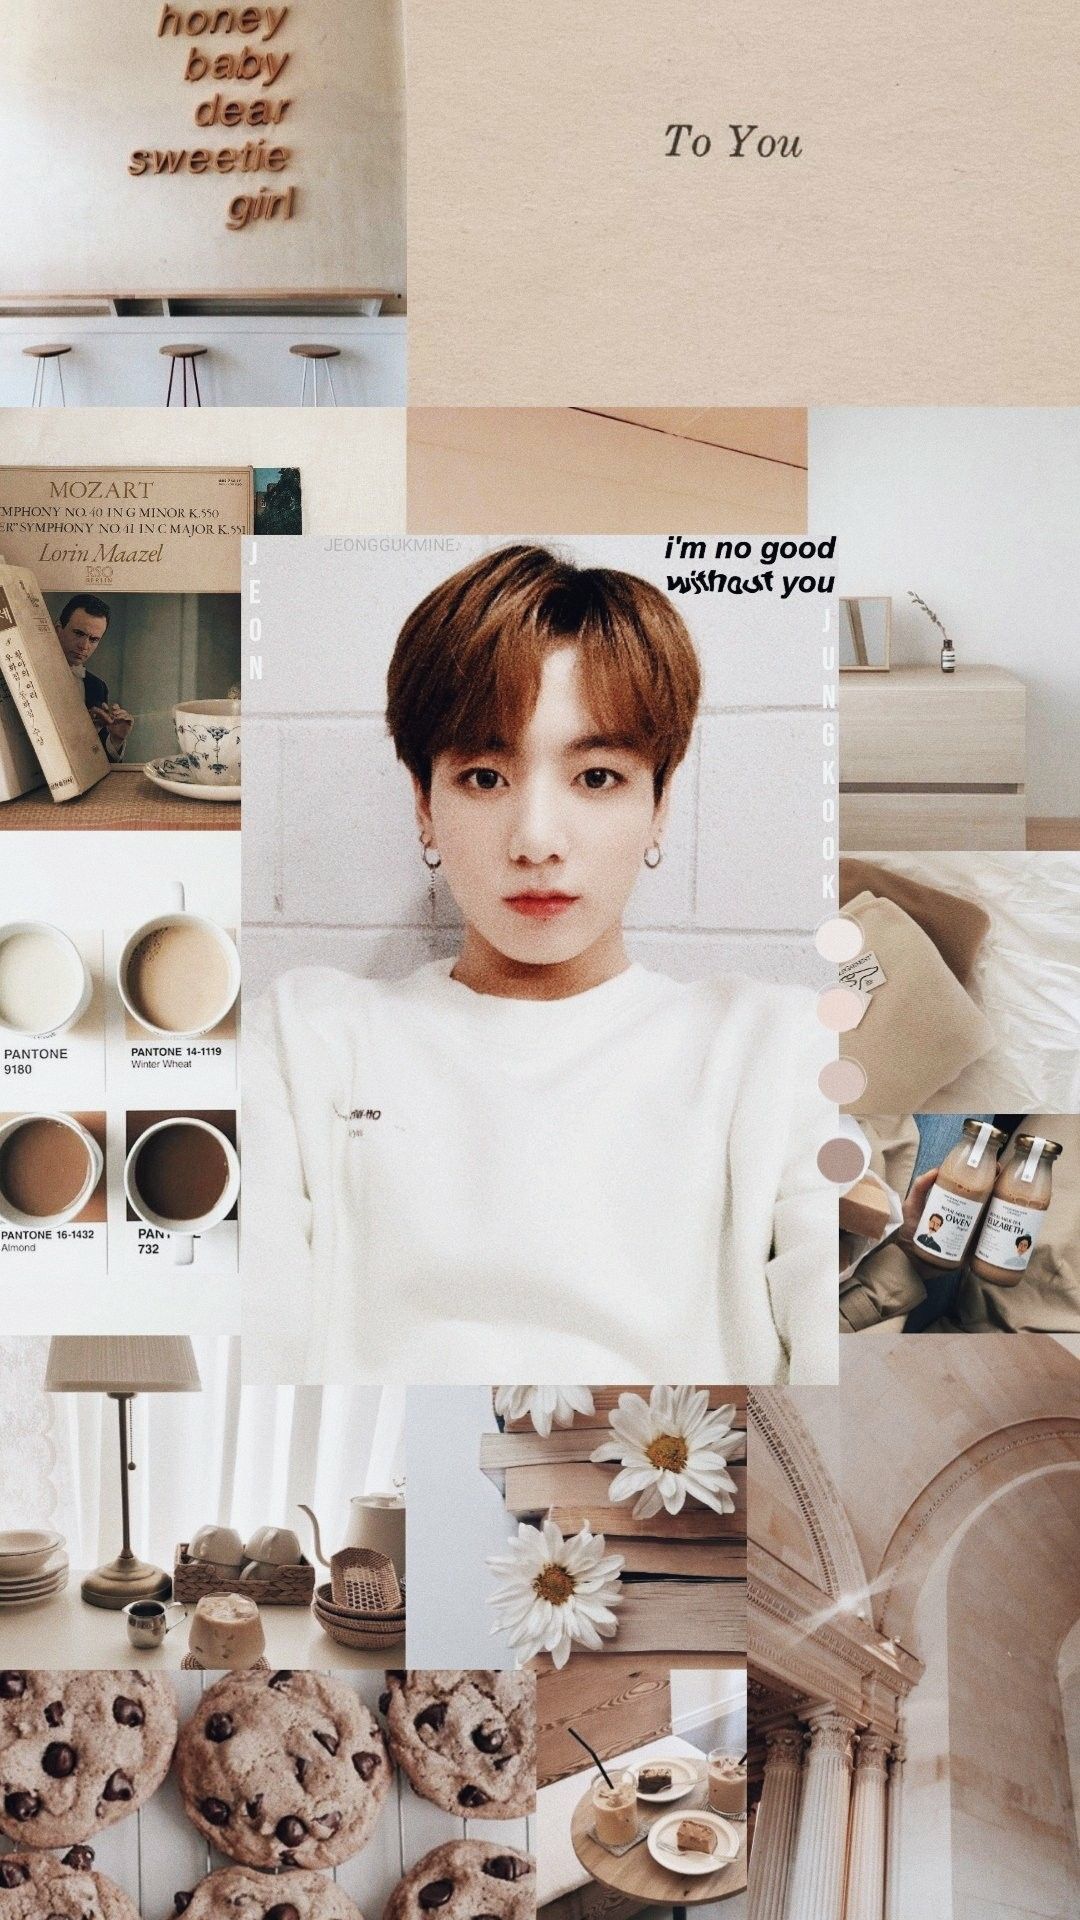 Aesthetic collage featuring TXT's Soobin, a vase of daisies, and a plate of cookies. - Jungkook